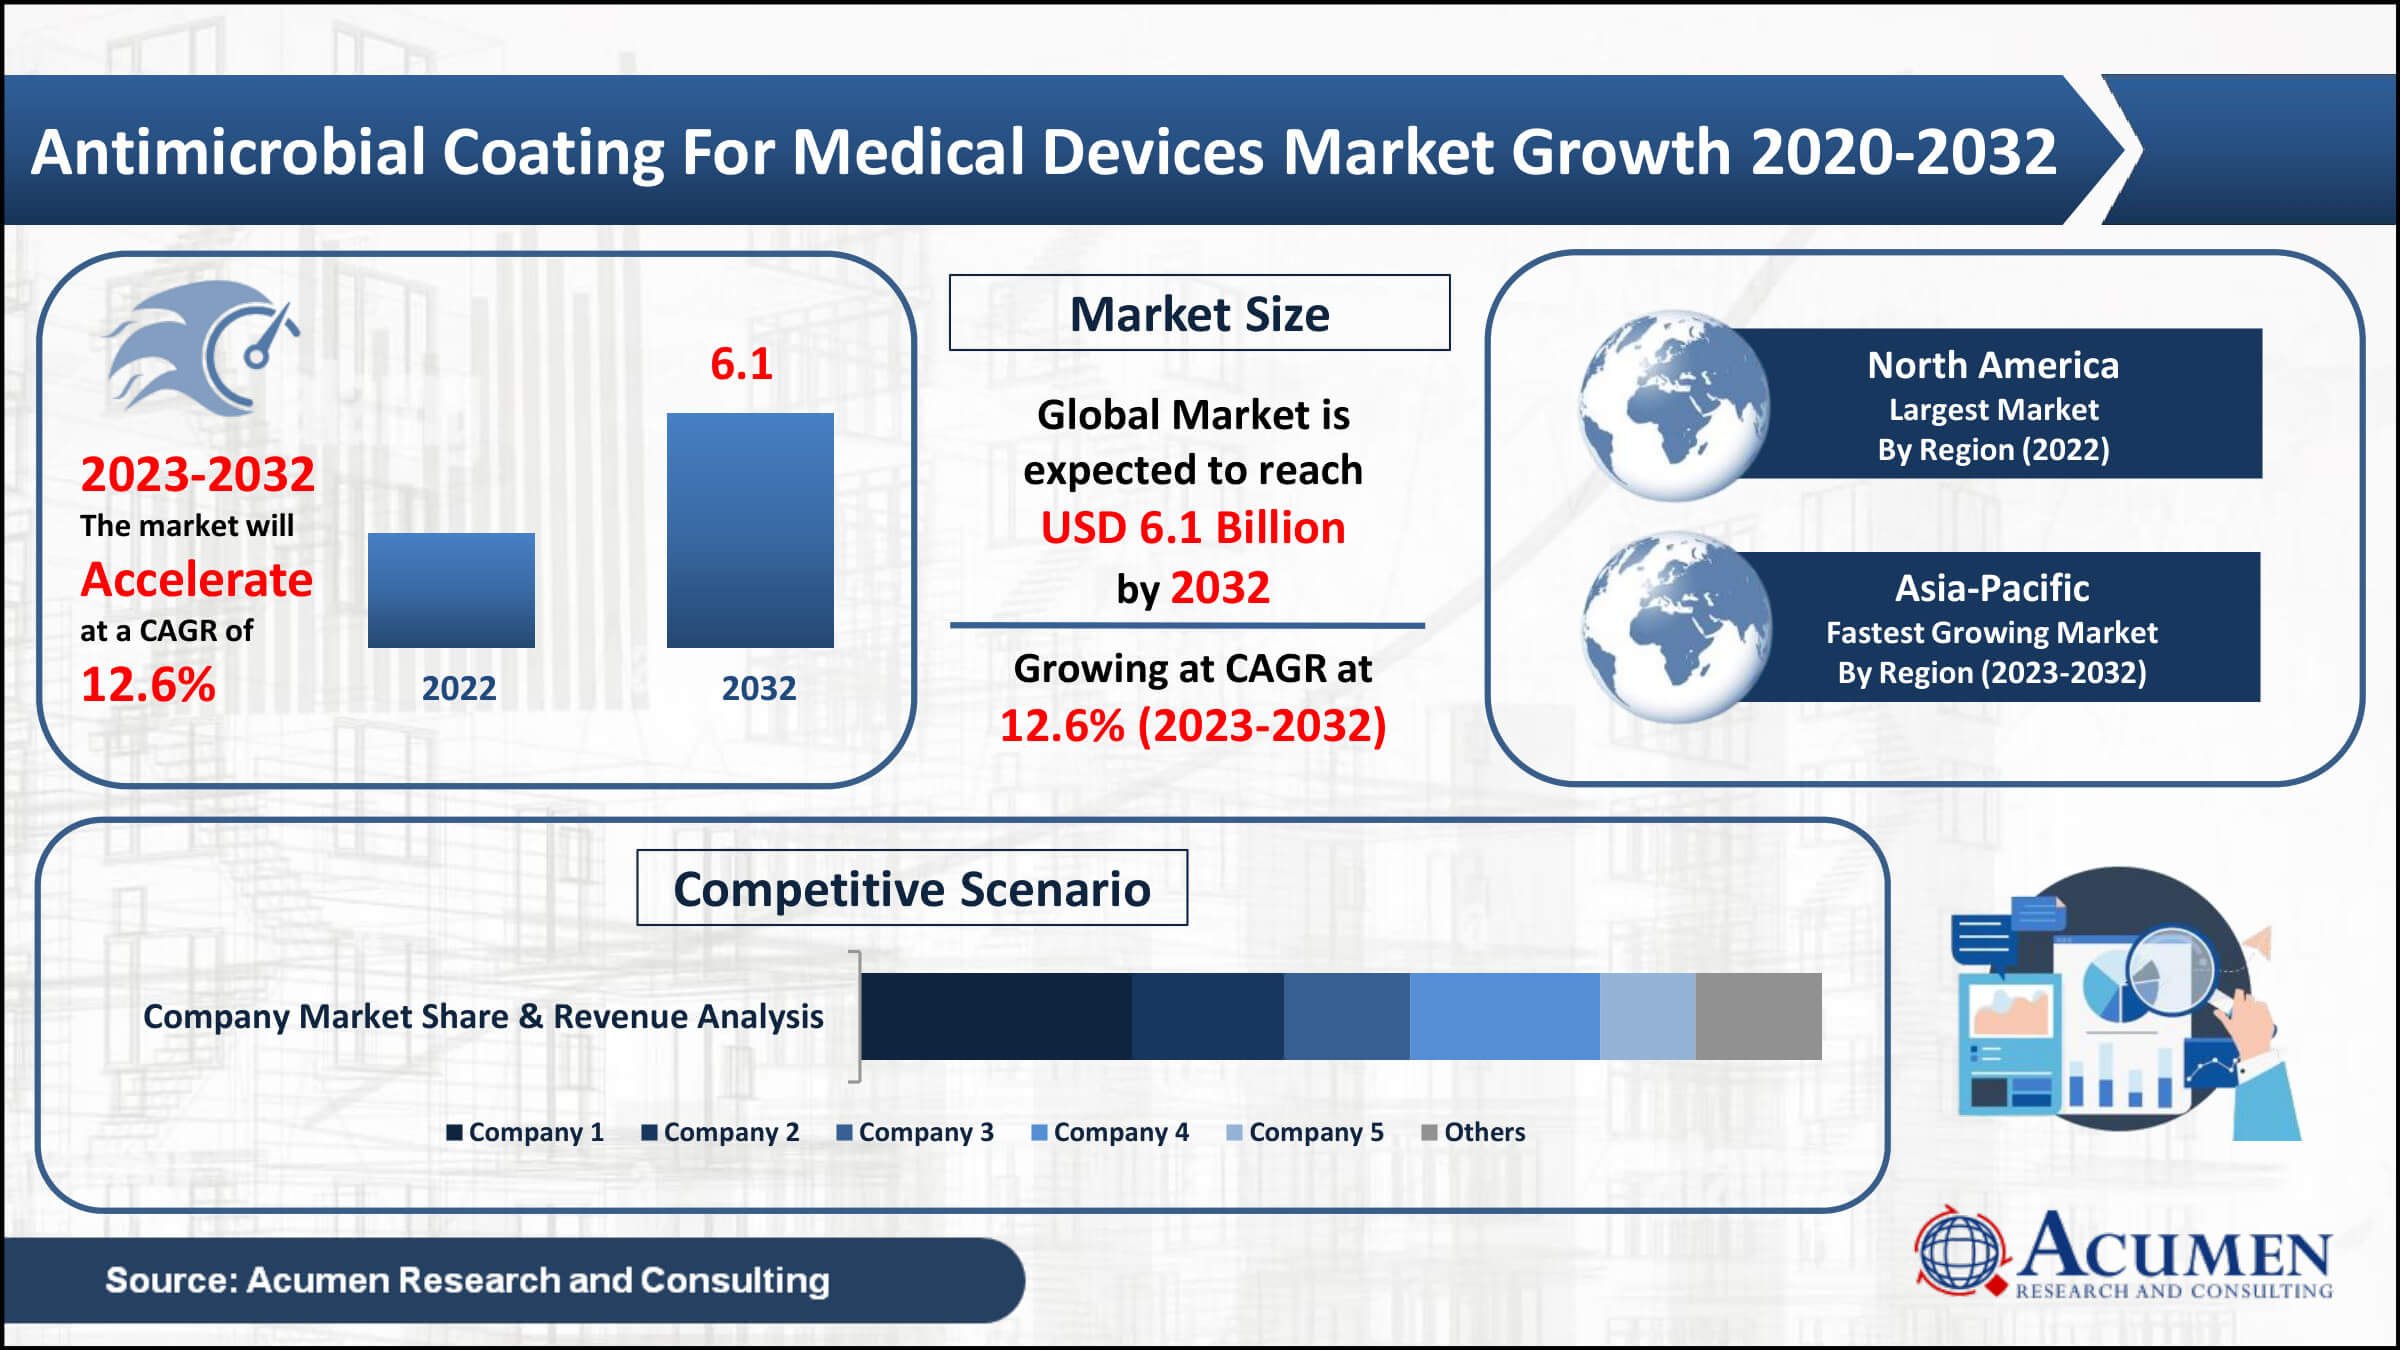 Antimicrobial Coating for Medical Devices Market Value